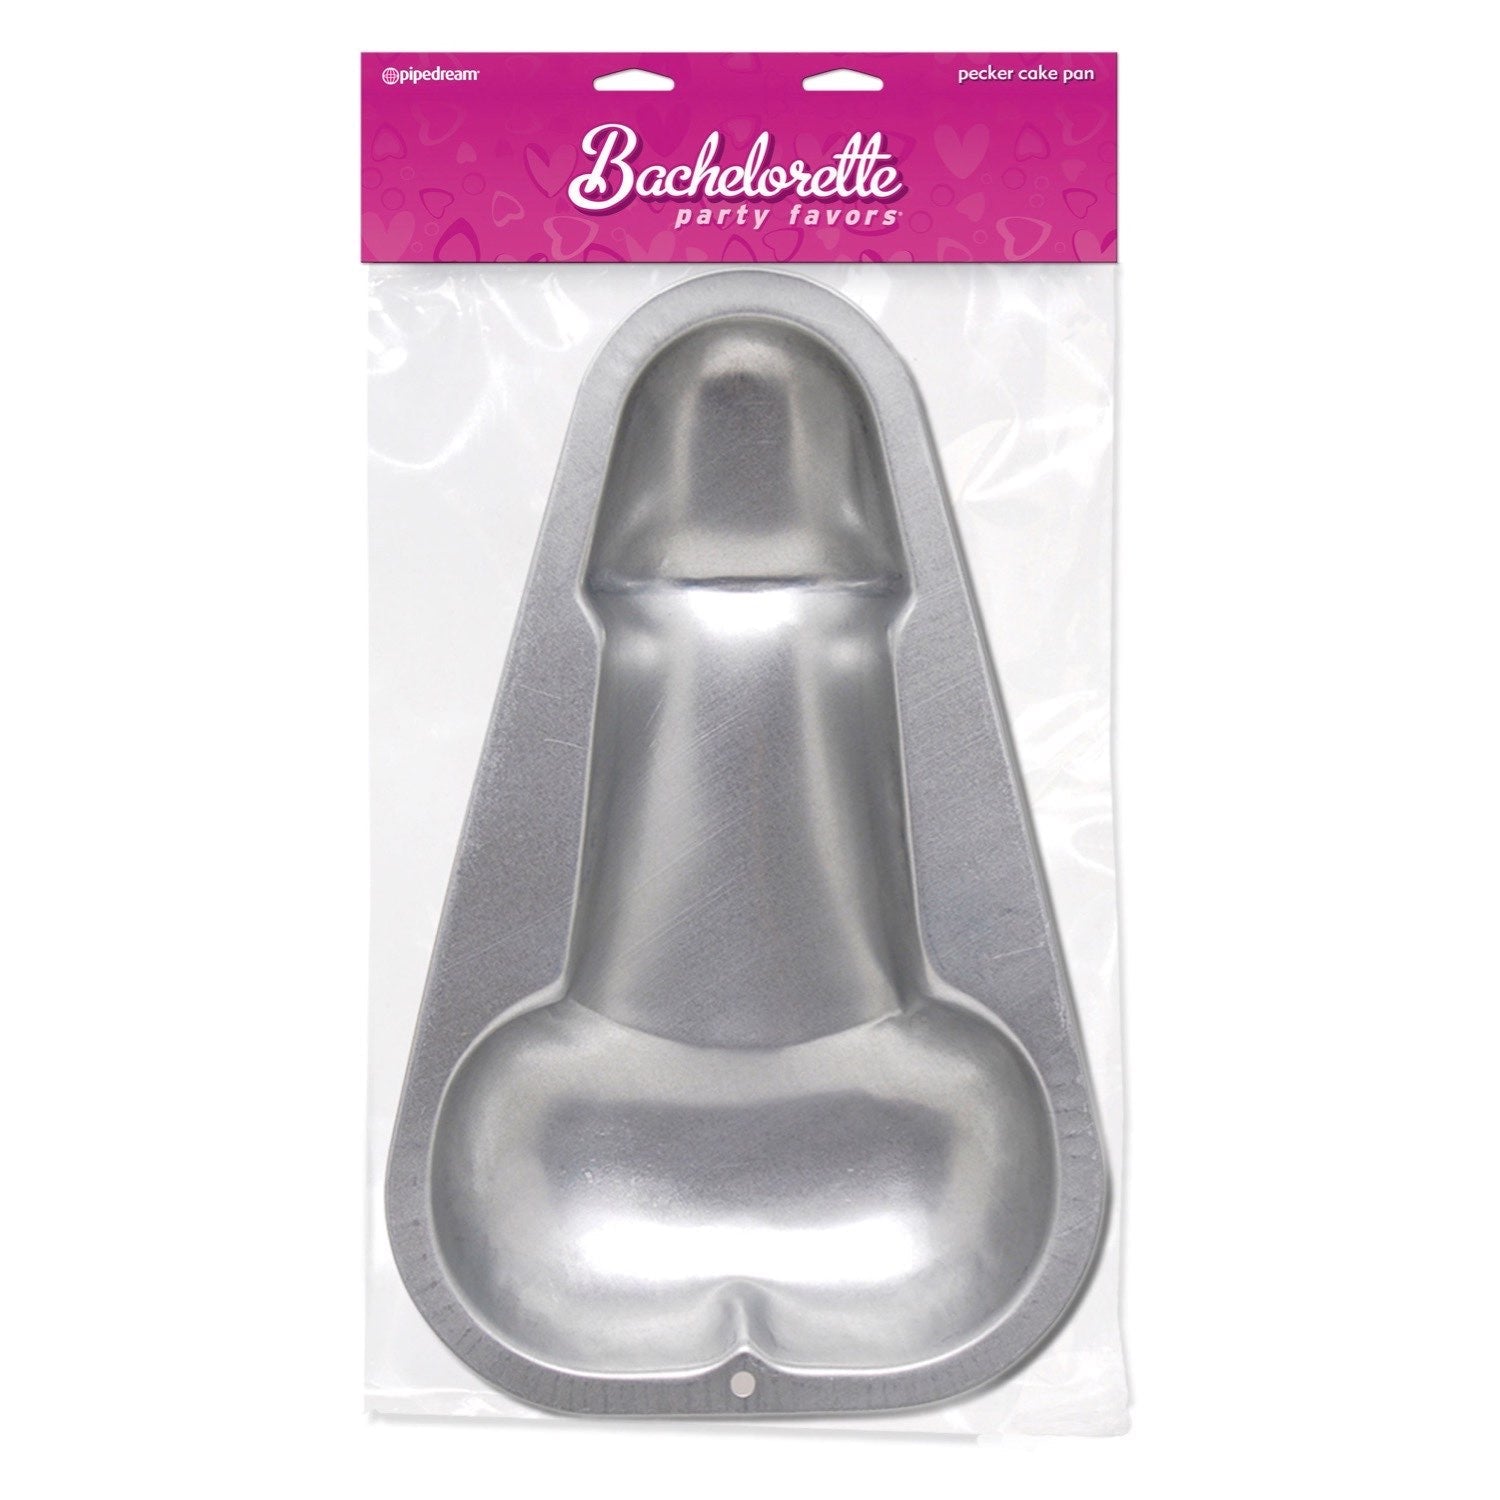 Bachelorette Party Favors Pecker Cake Pan - Novelty Cake Pan by Pipedream